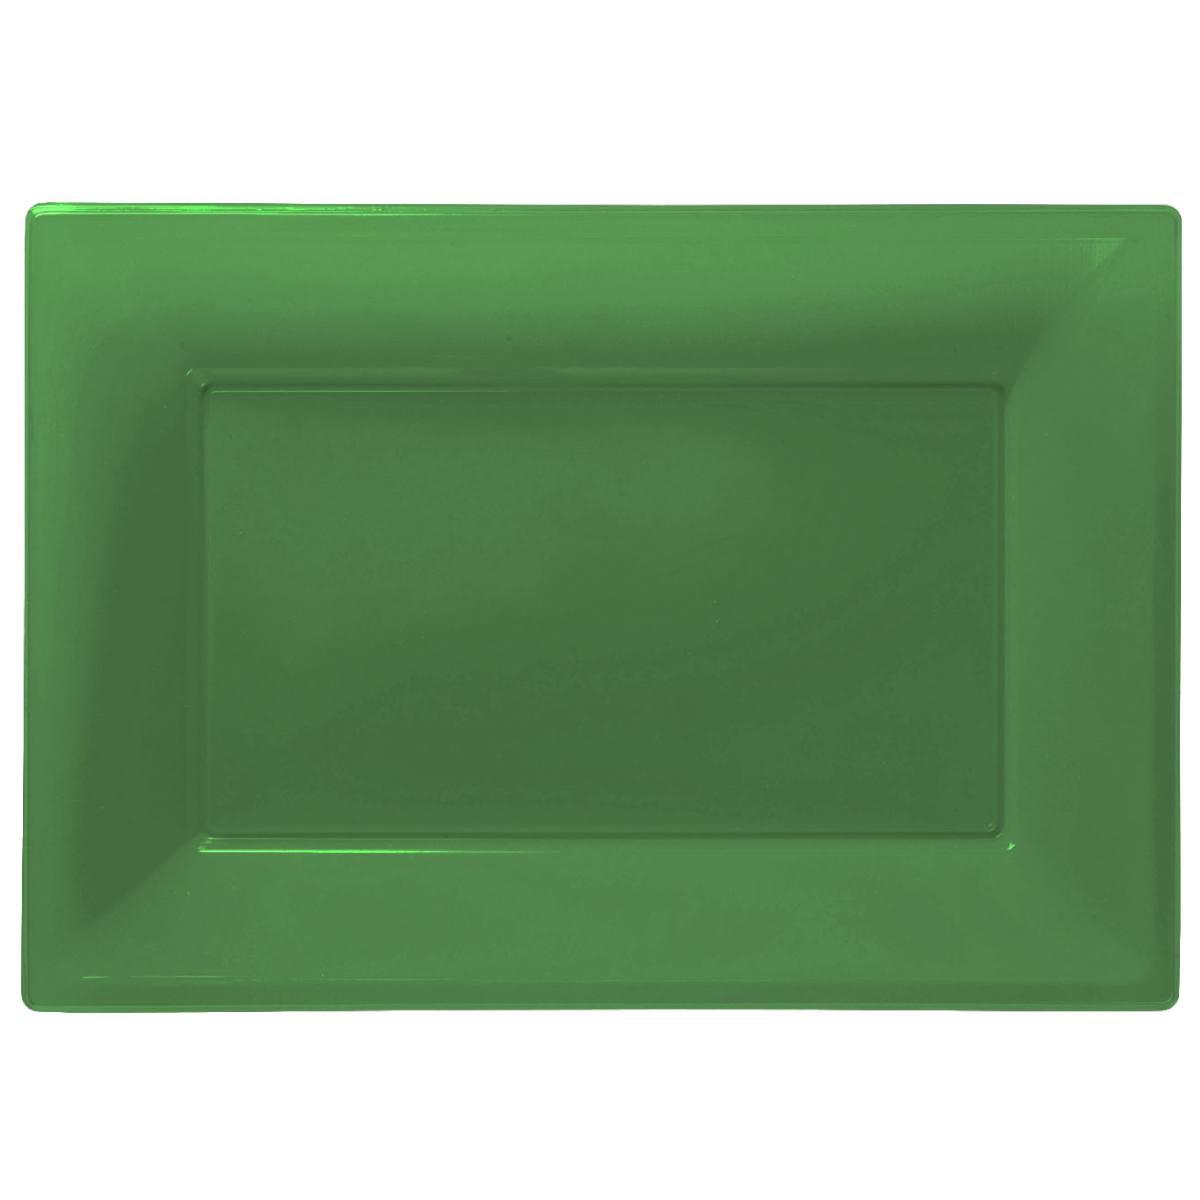 Pk 3 Festive Green Plastic Serving Platters by Amscan 9903727 available here at Karnival Costumes online party shop